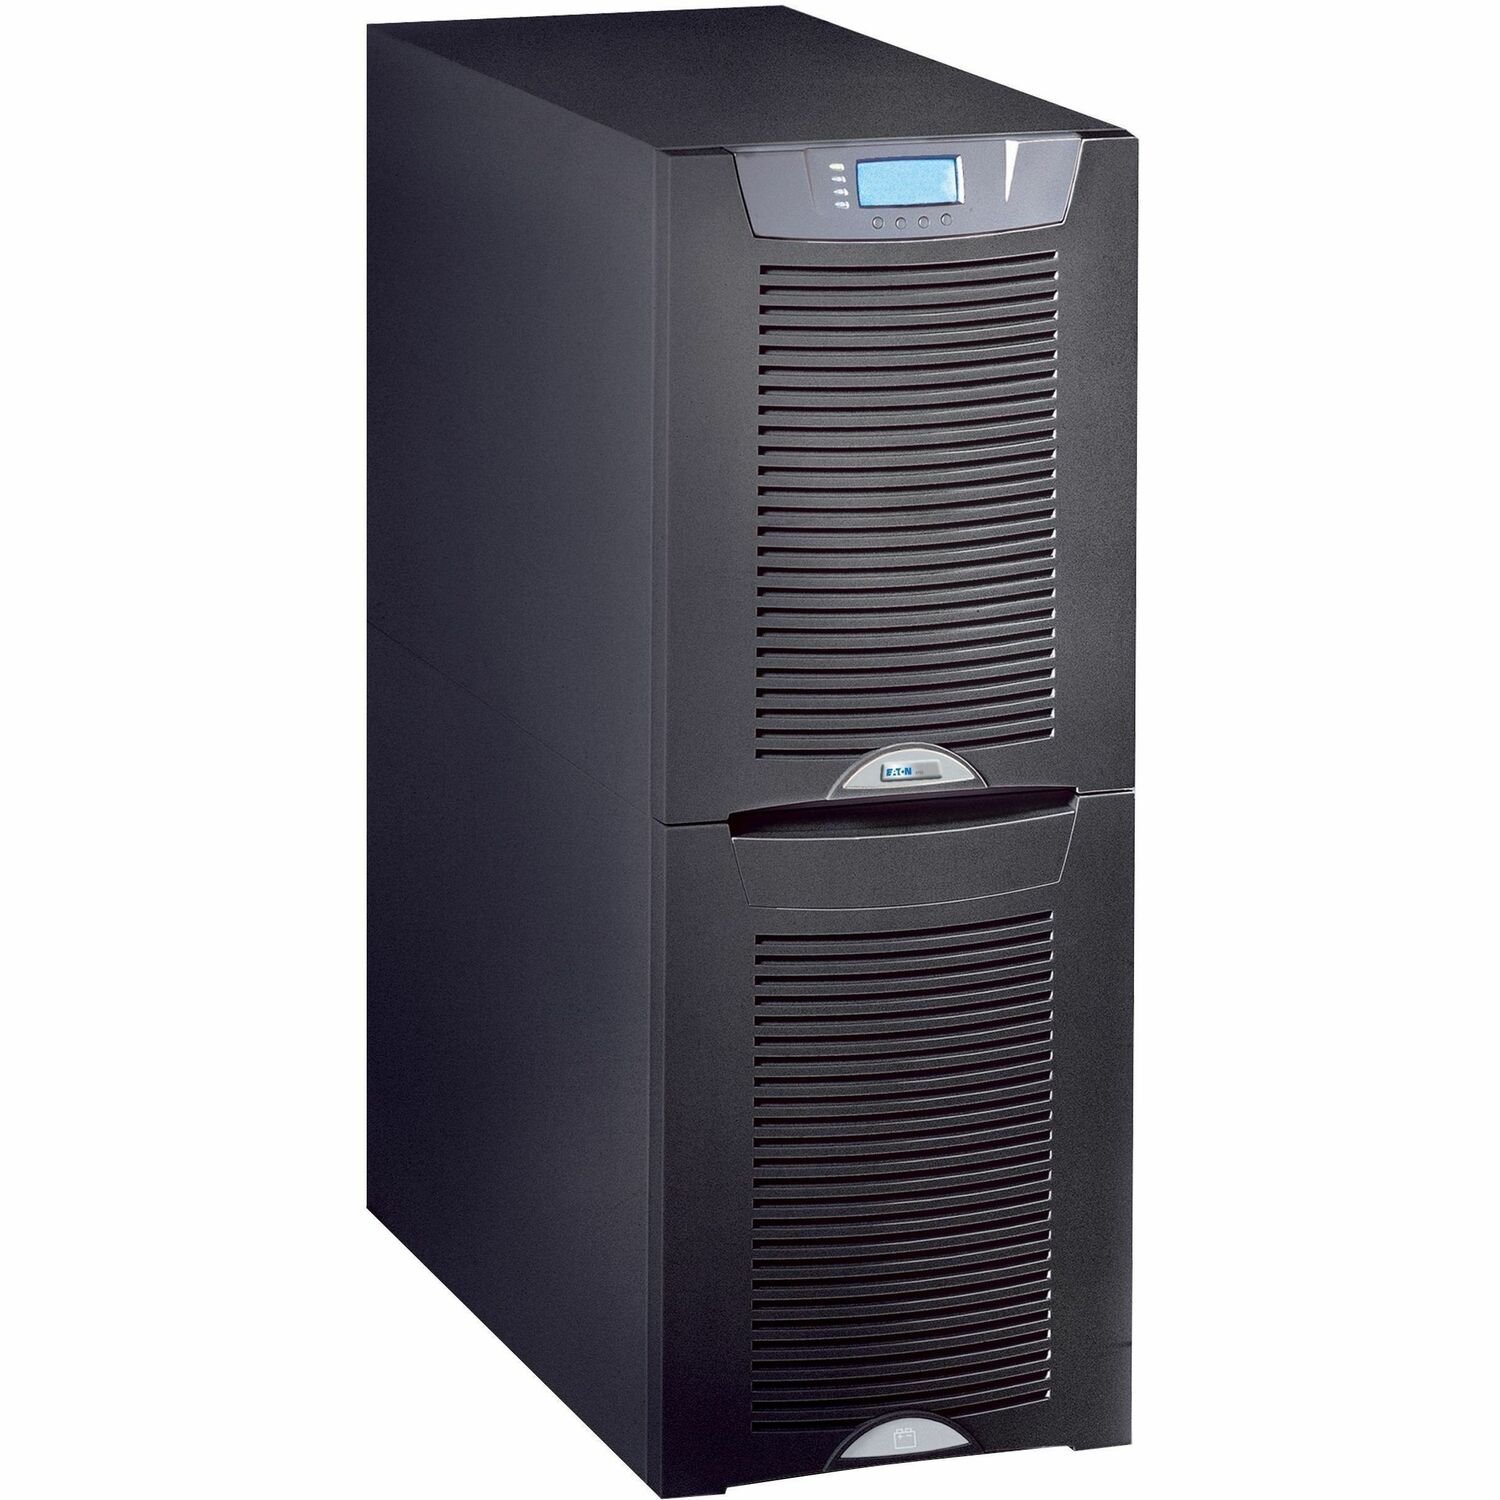 Eaton 915530N20-MBS Double Conversion Online UPS - 30 kVA/27 kW - Single Phase